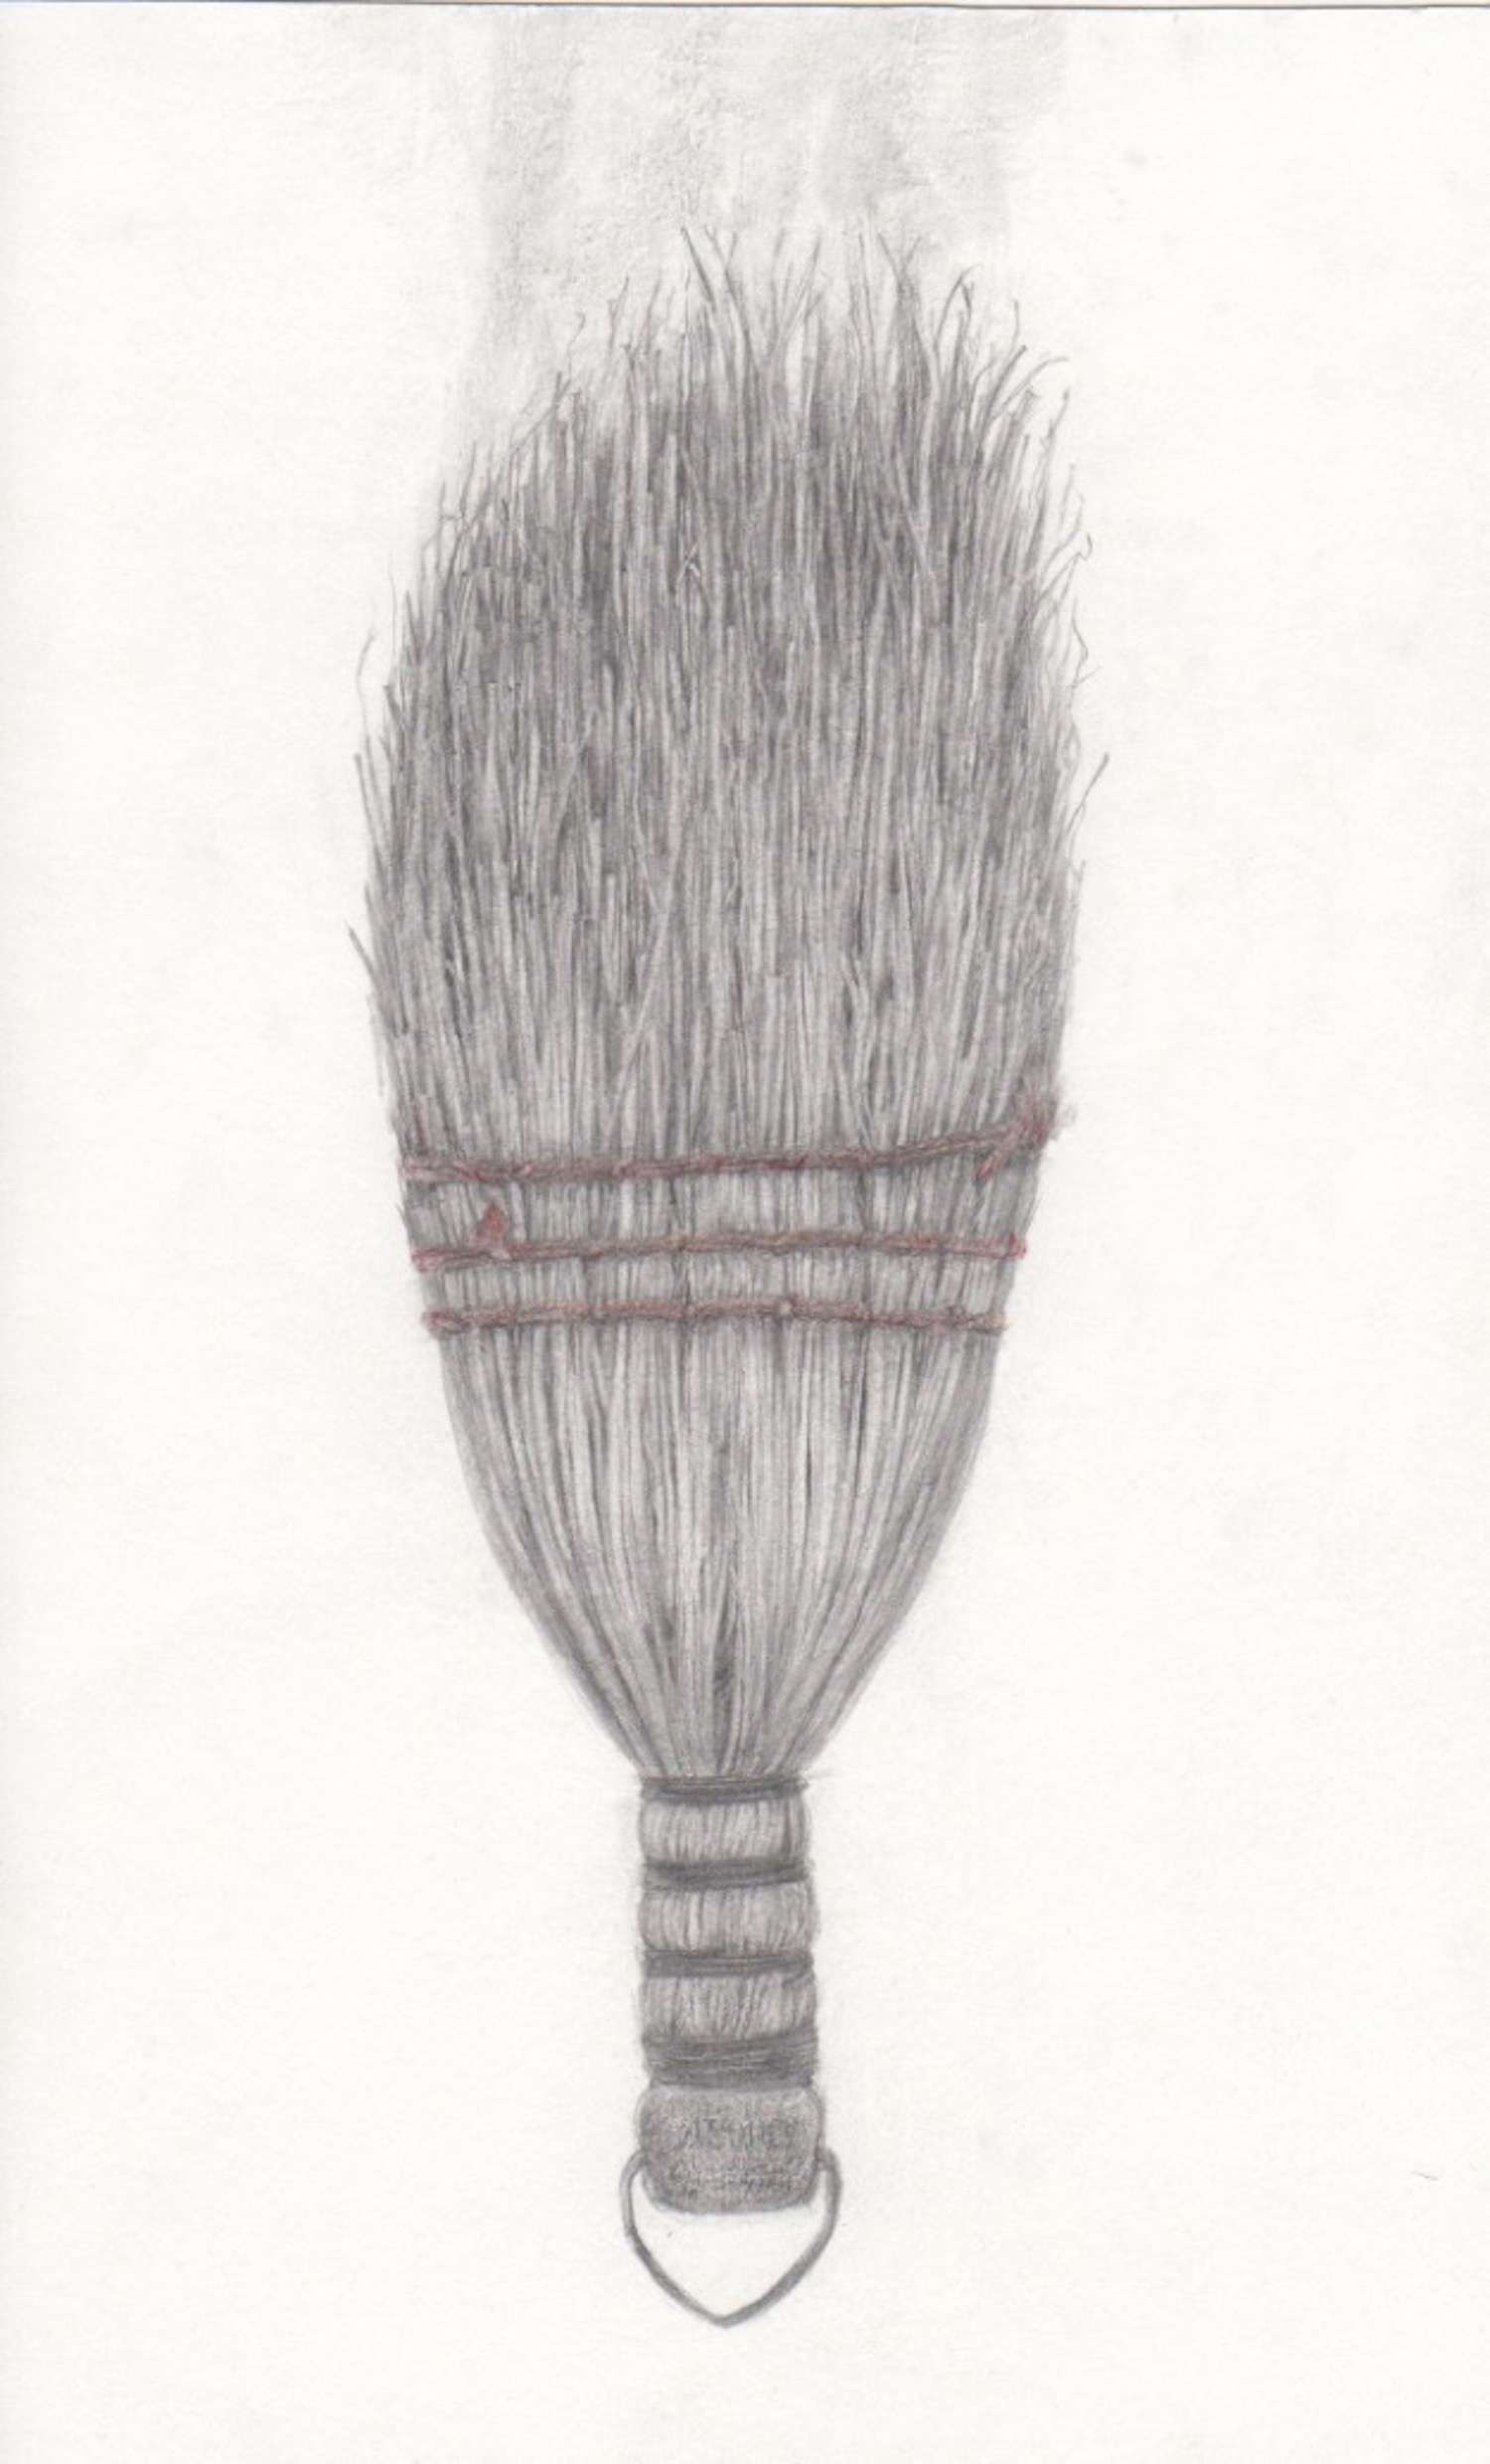 Tall Whisk Broom